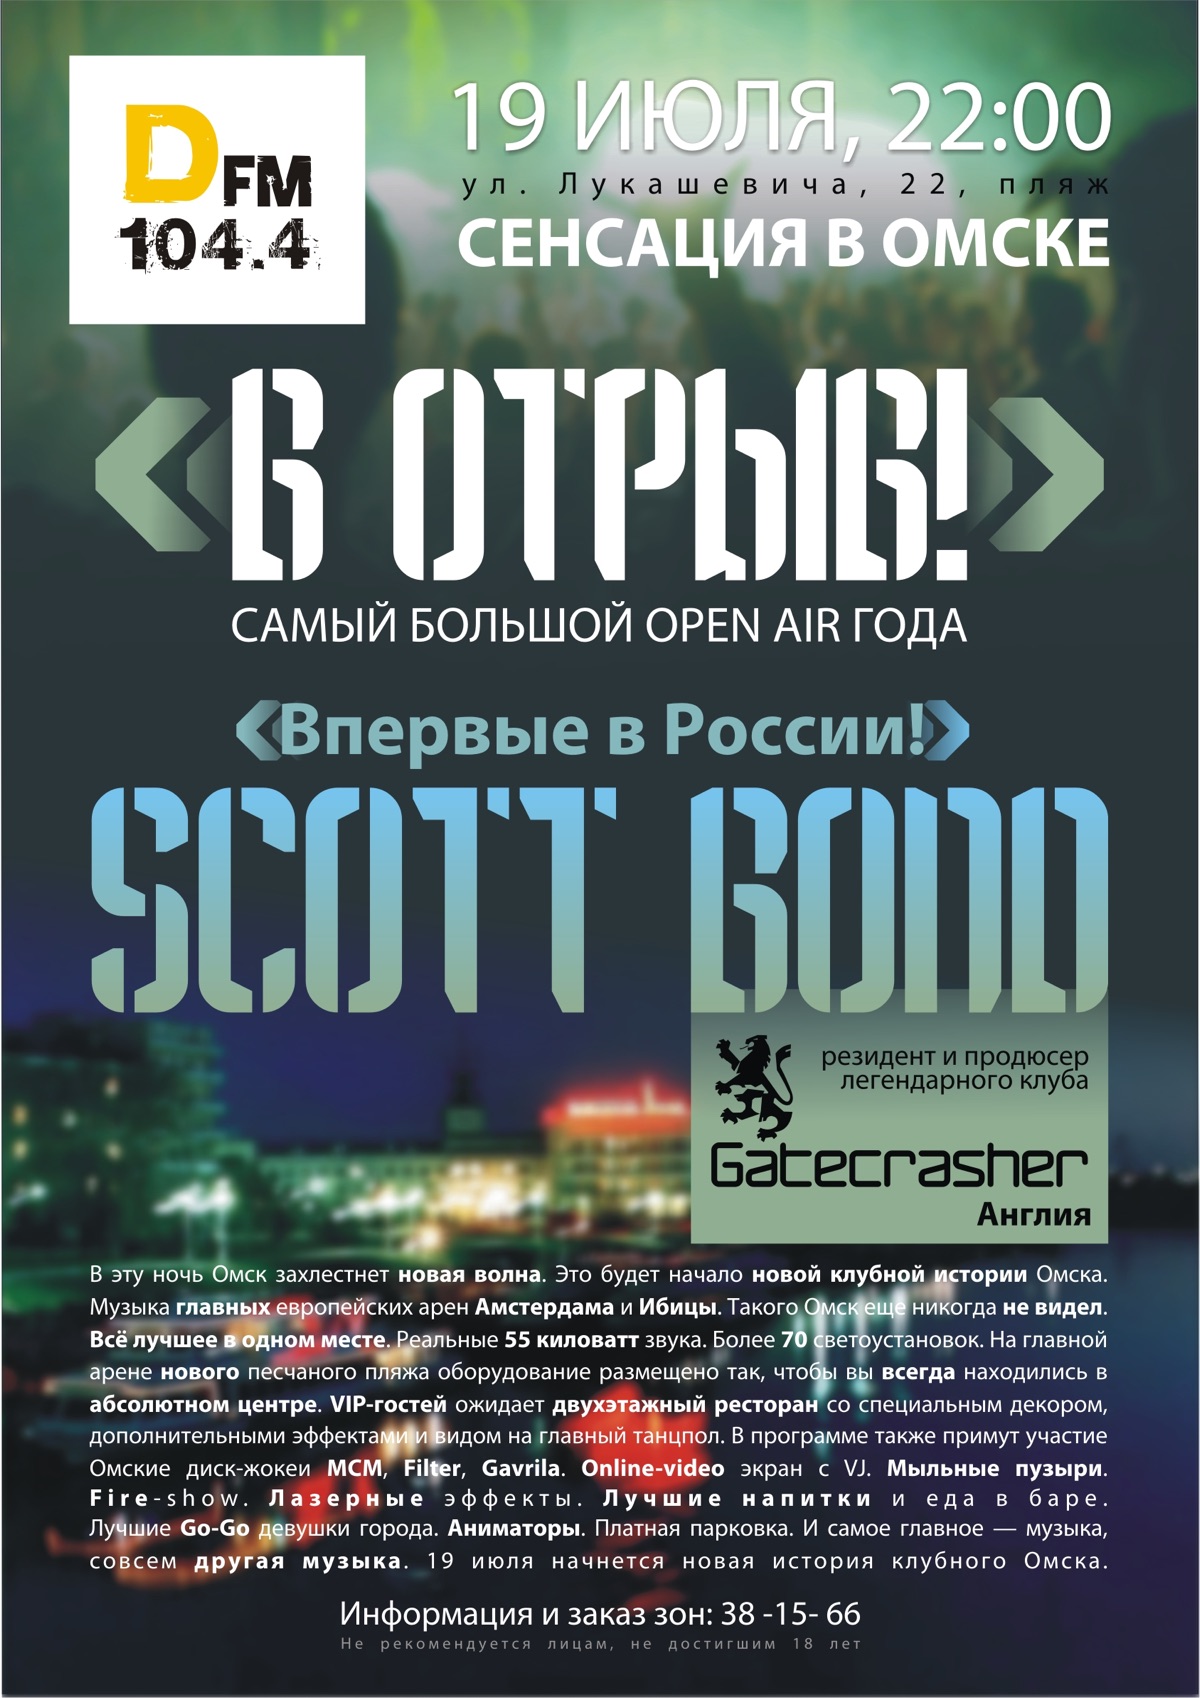 Let’s rock! poster 19 july 2008 Oleg Borisov Omsk Moscow Russia